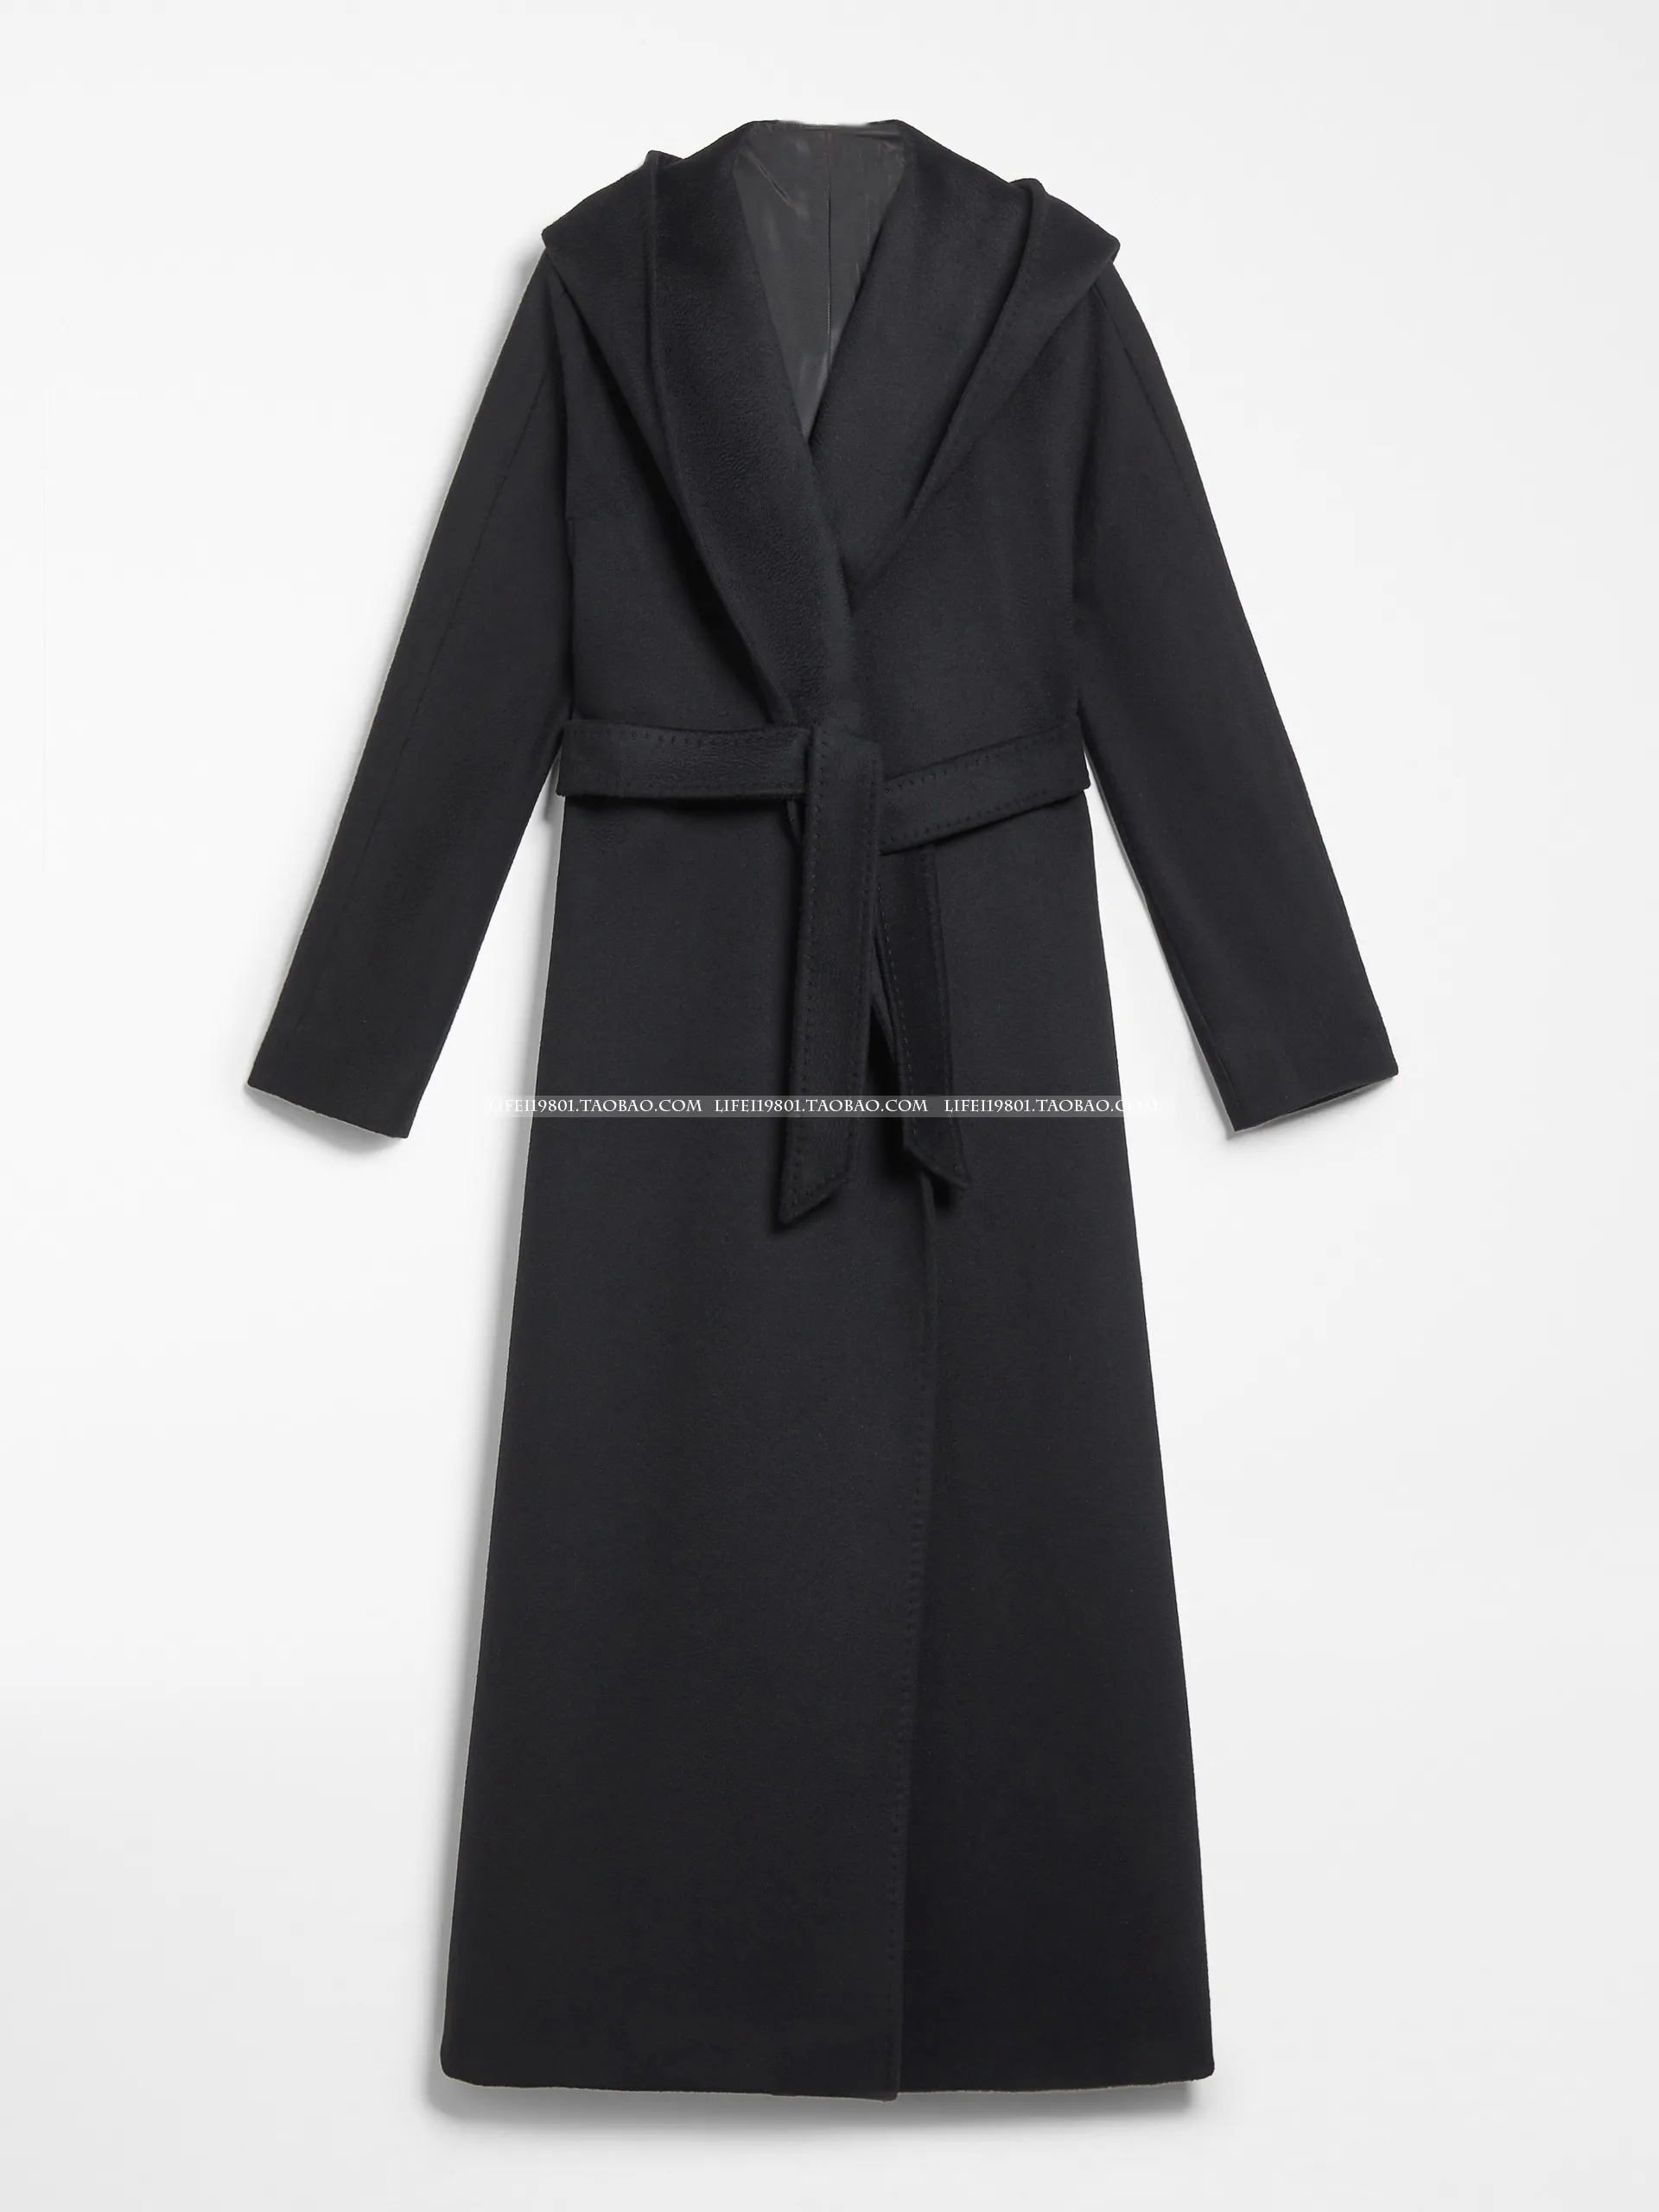 Autumn Winter black belted Hooded Cardigan Handmade Cashmere Double-Sided Jacket